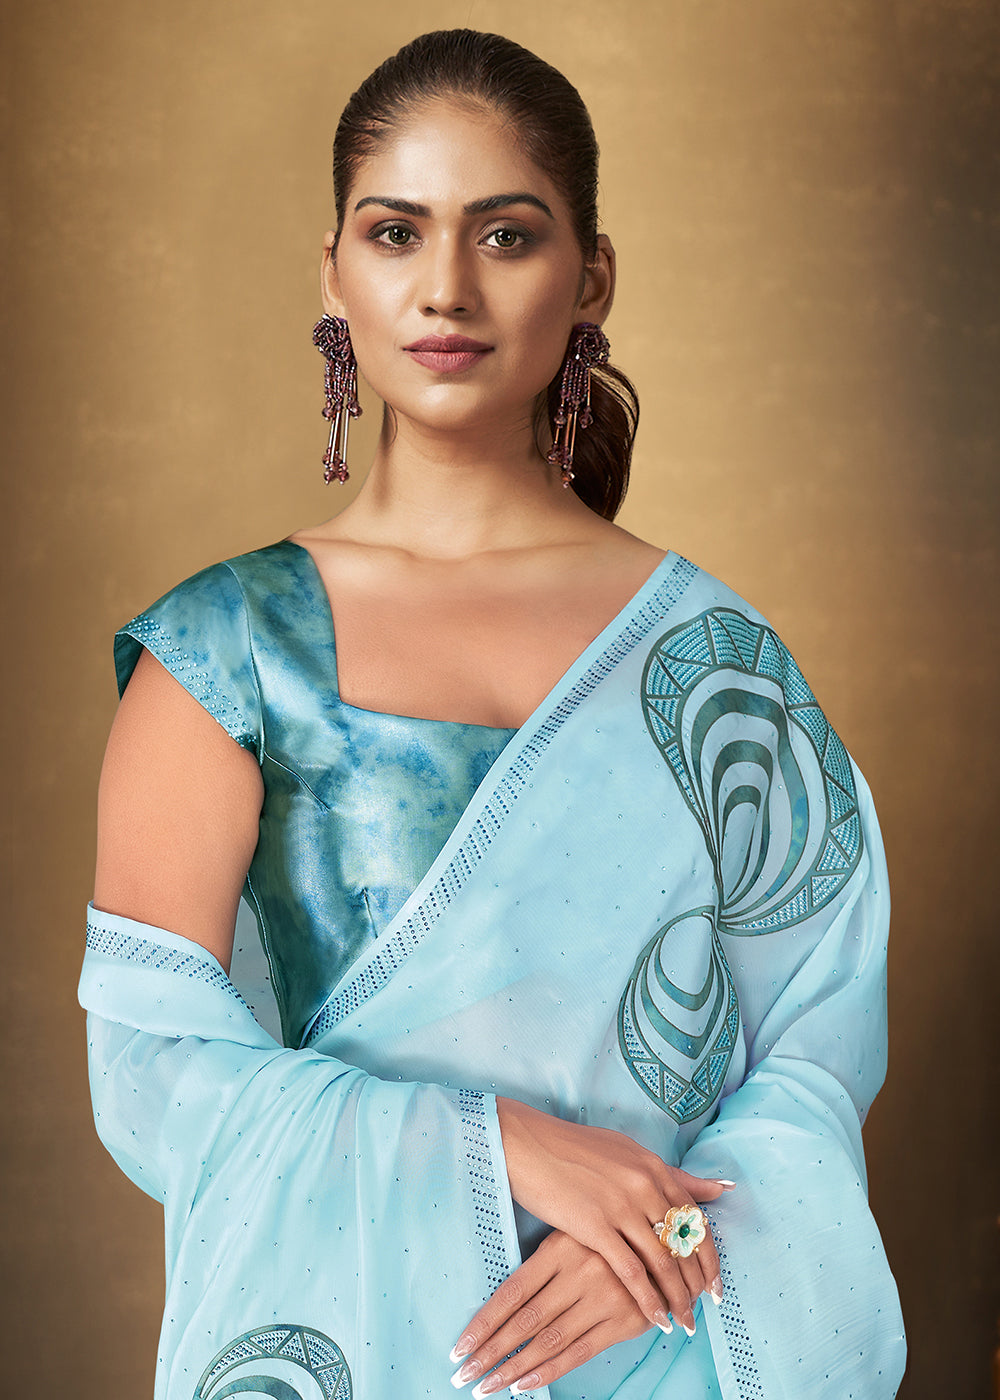 Buy Now Sky Blue Organza Crepe Designer Saree Online in USA, UK, Canada & Worldwide at Empress Clothing.